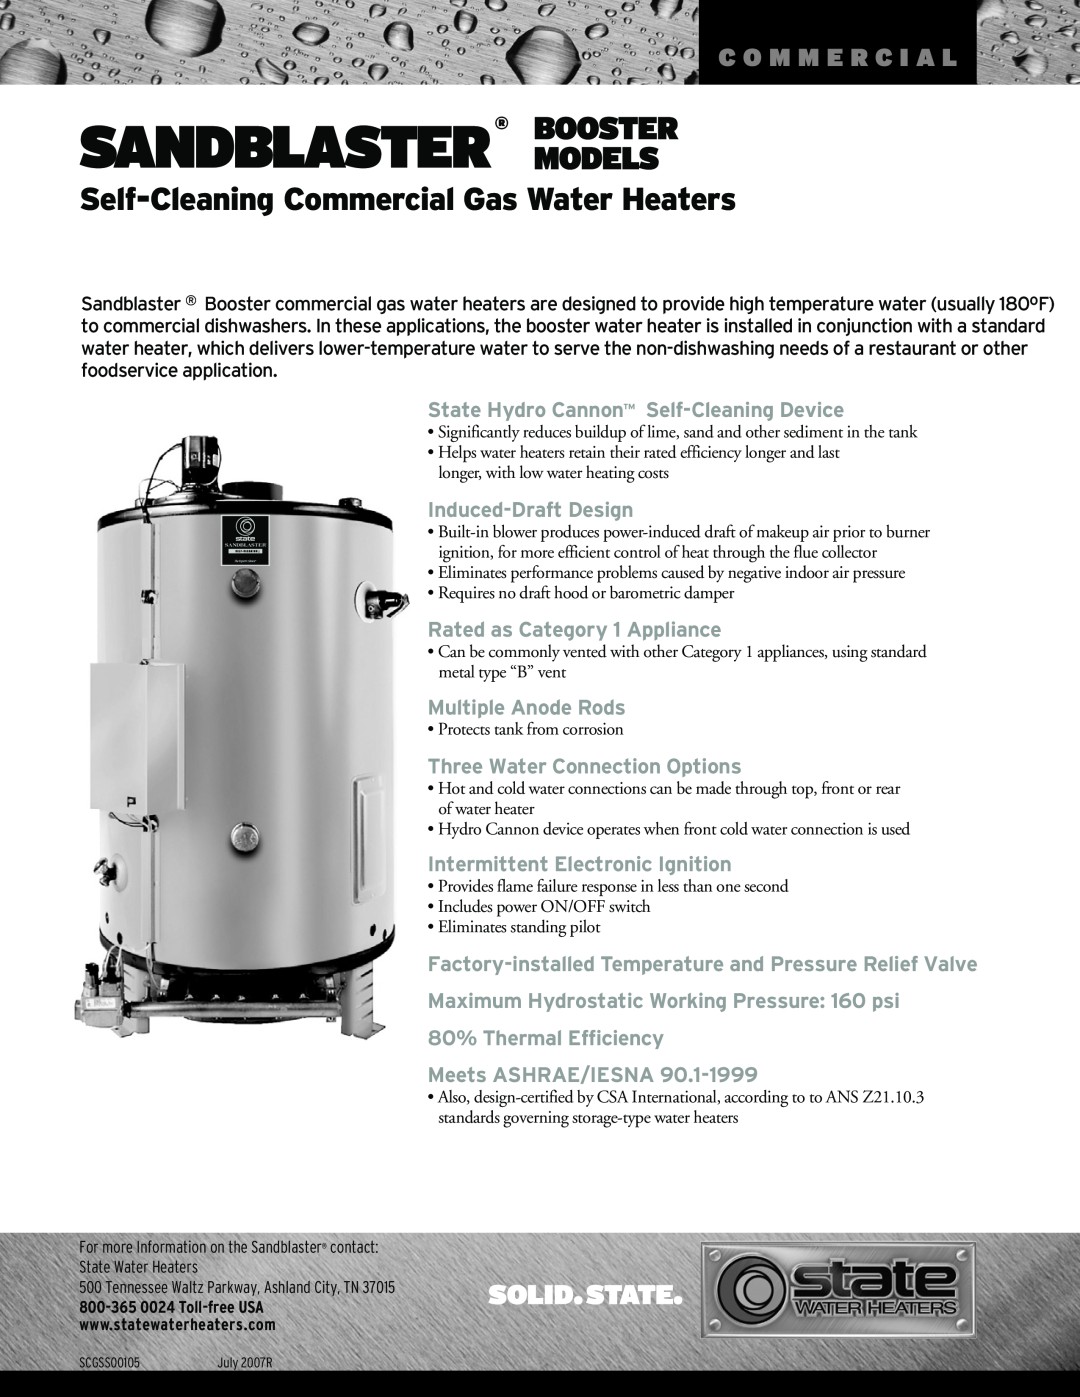 State Industries Self-Cleaning Commercial Gas Water Heaters manual Sandblaster Models, Booster, C O M M E R C I A L 